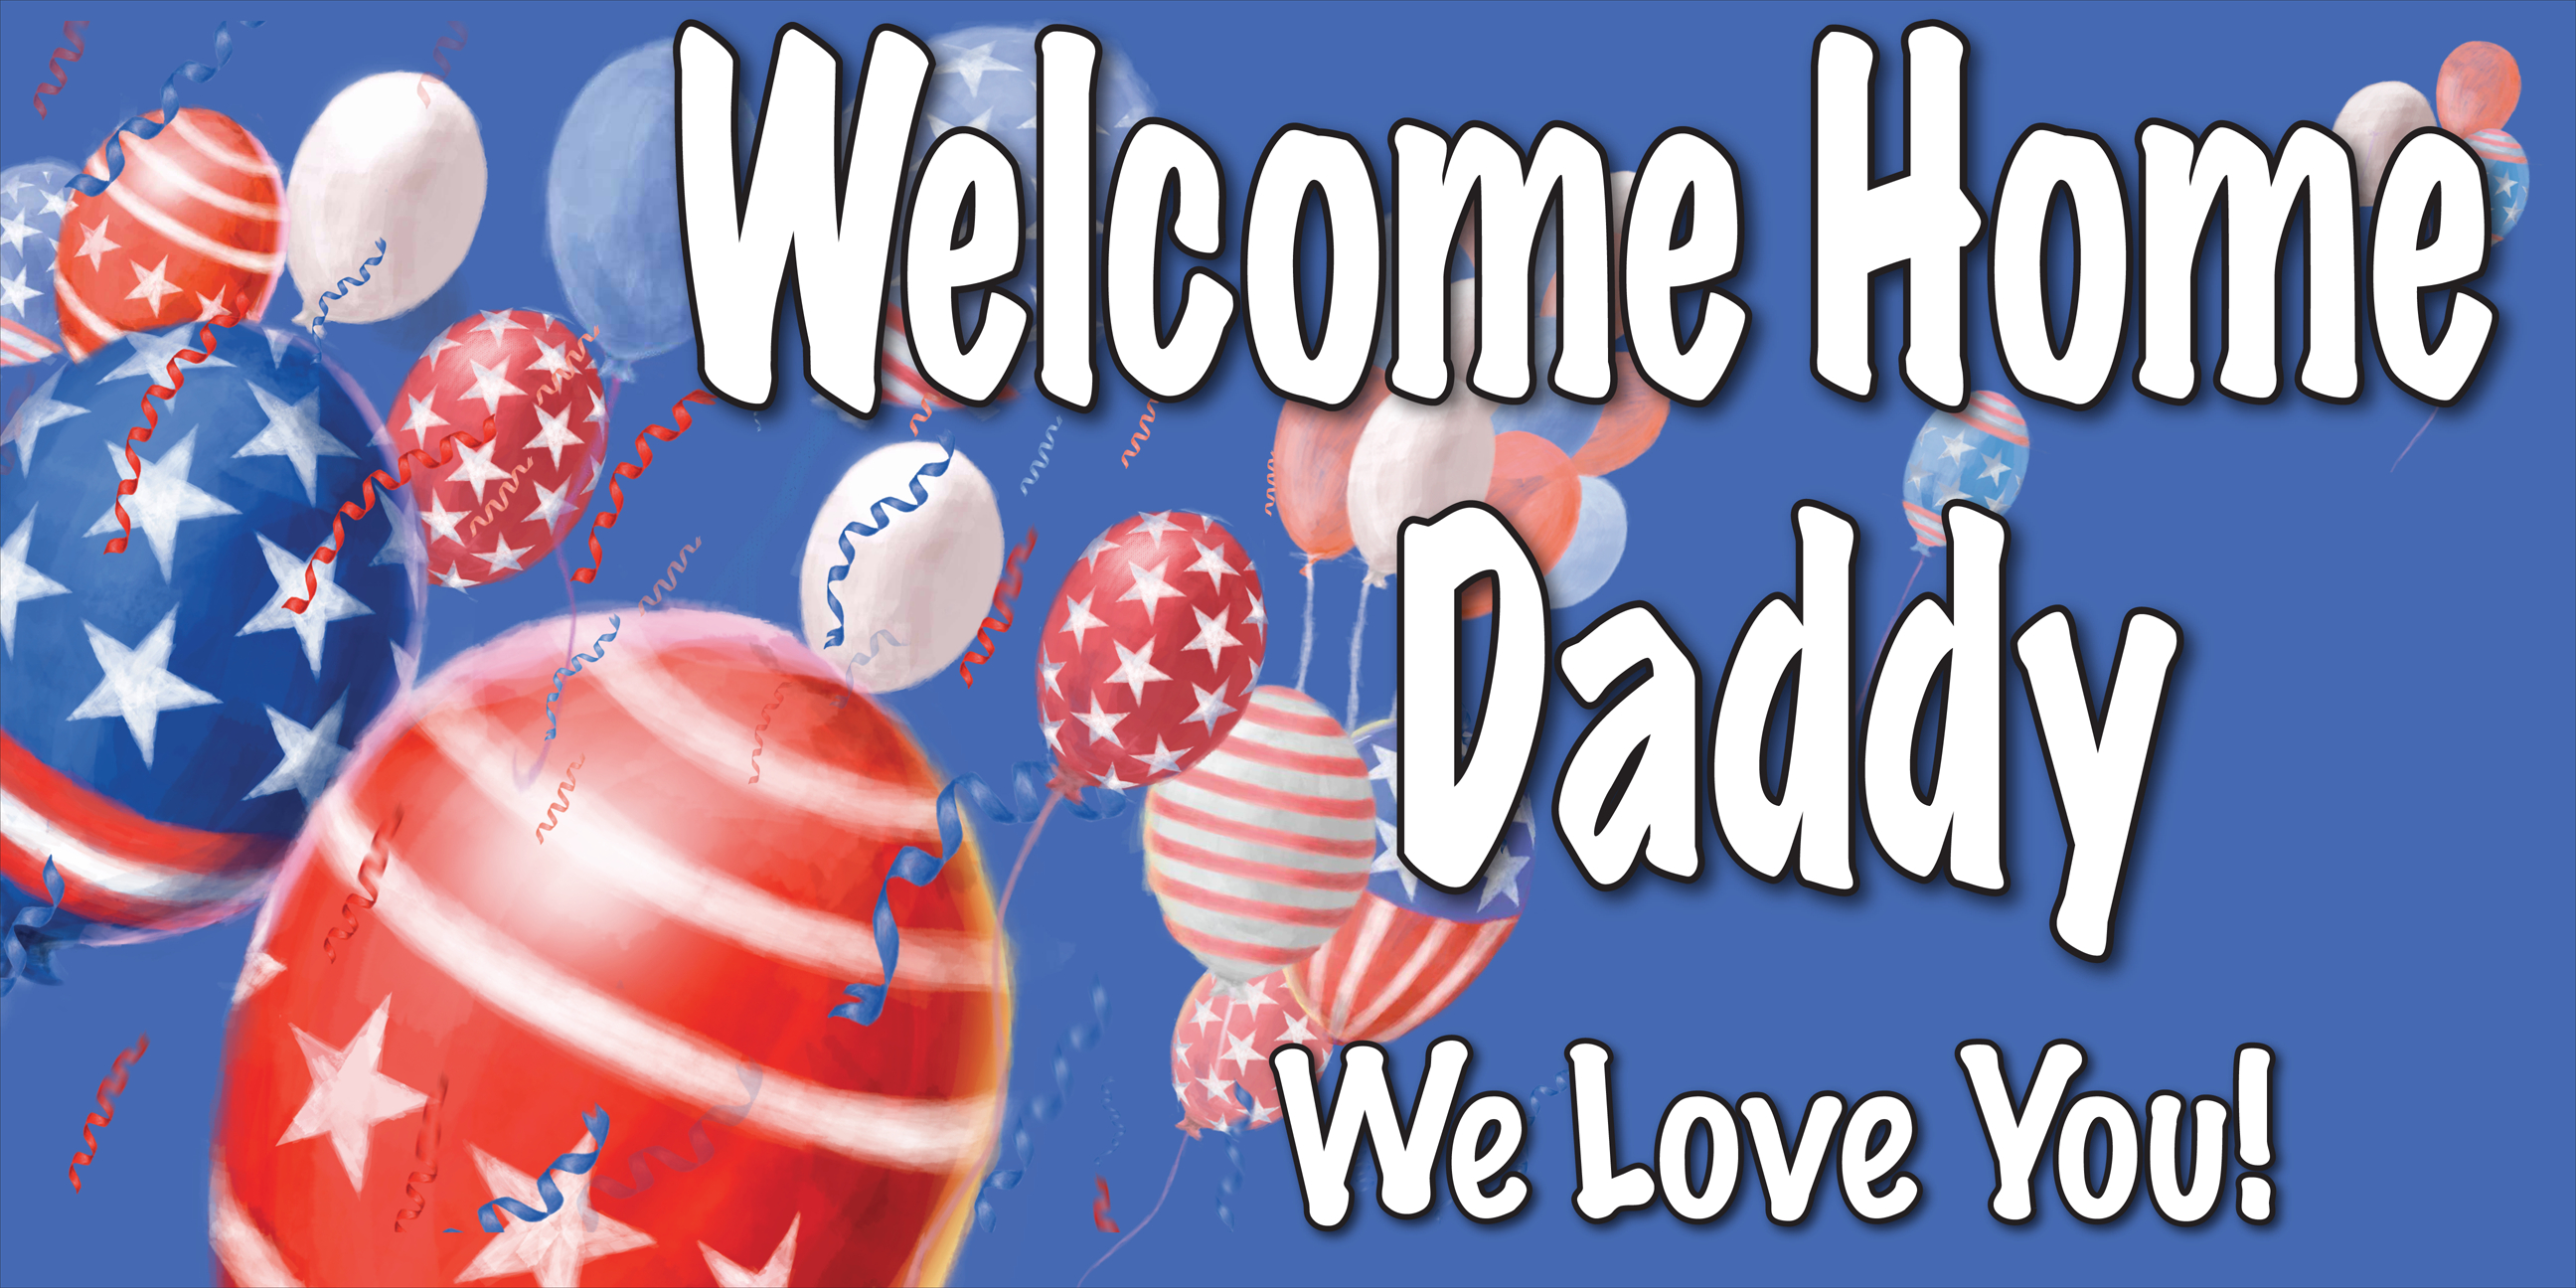 Welcome Home Cards Free Printable | Welcome Home Banners Style #5 - Welcome Home Cards Free Printable